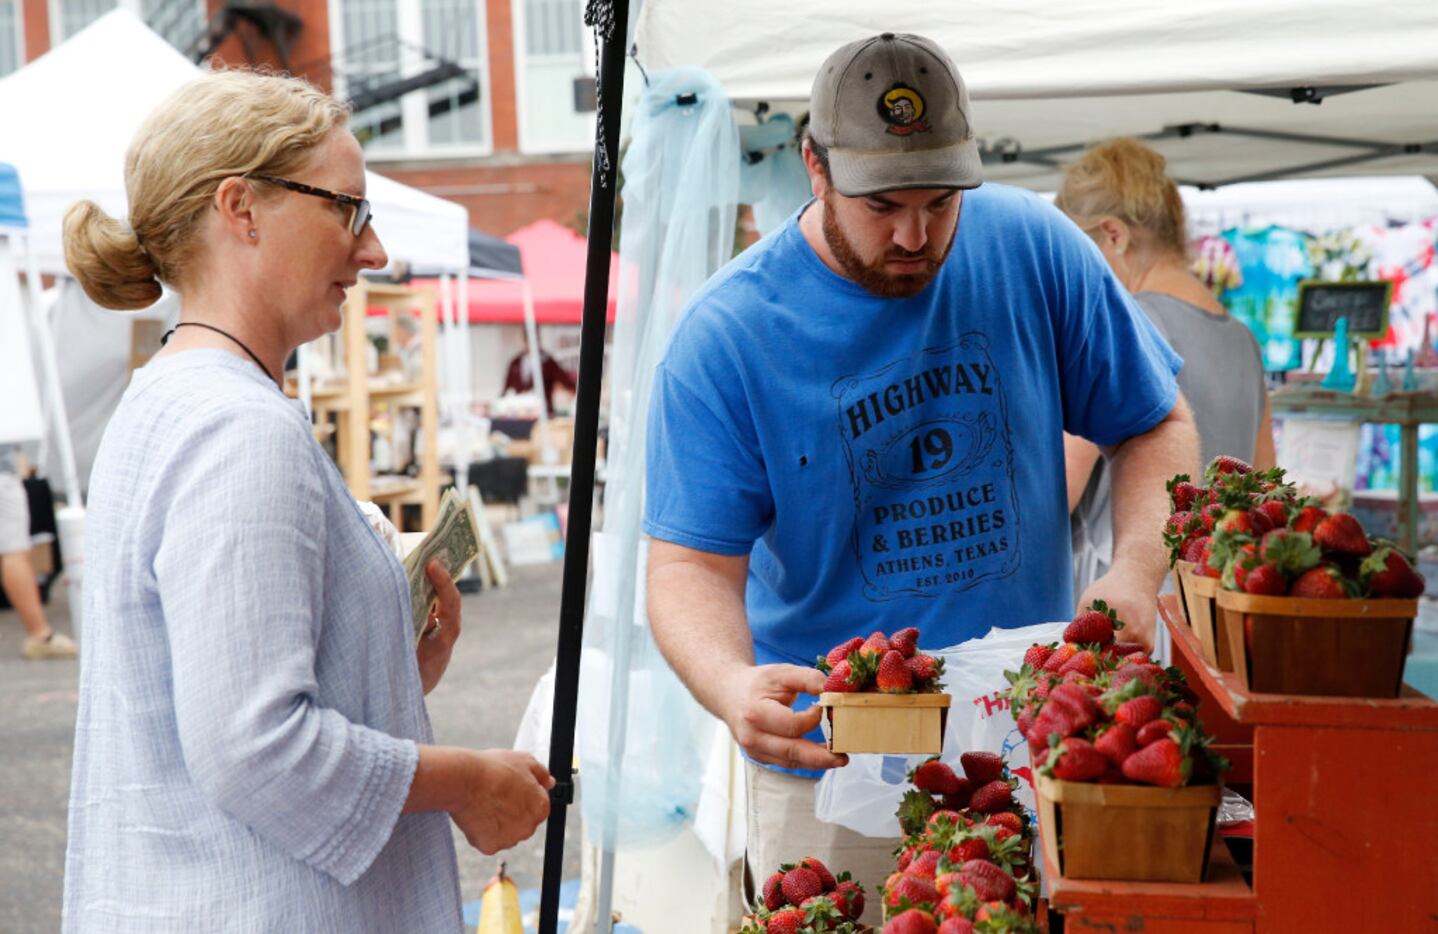 Bobby Bever bags strawberries for Sarah Perry at the Highway 19 Produce and Berries booth.